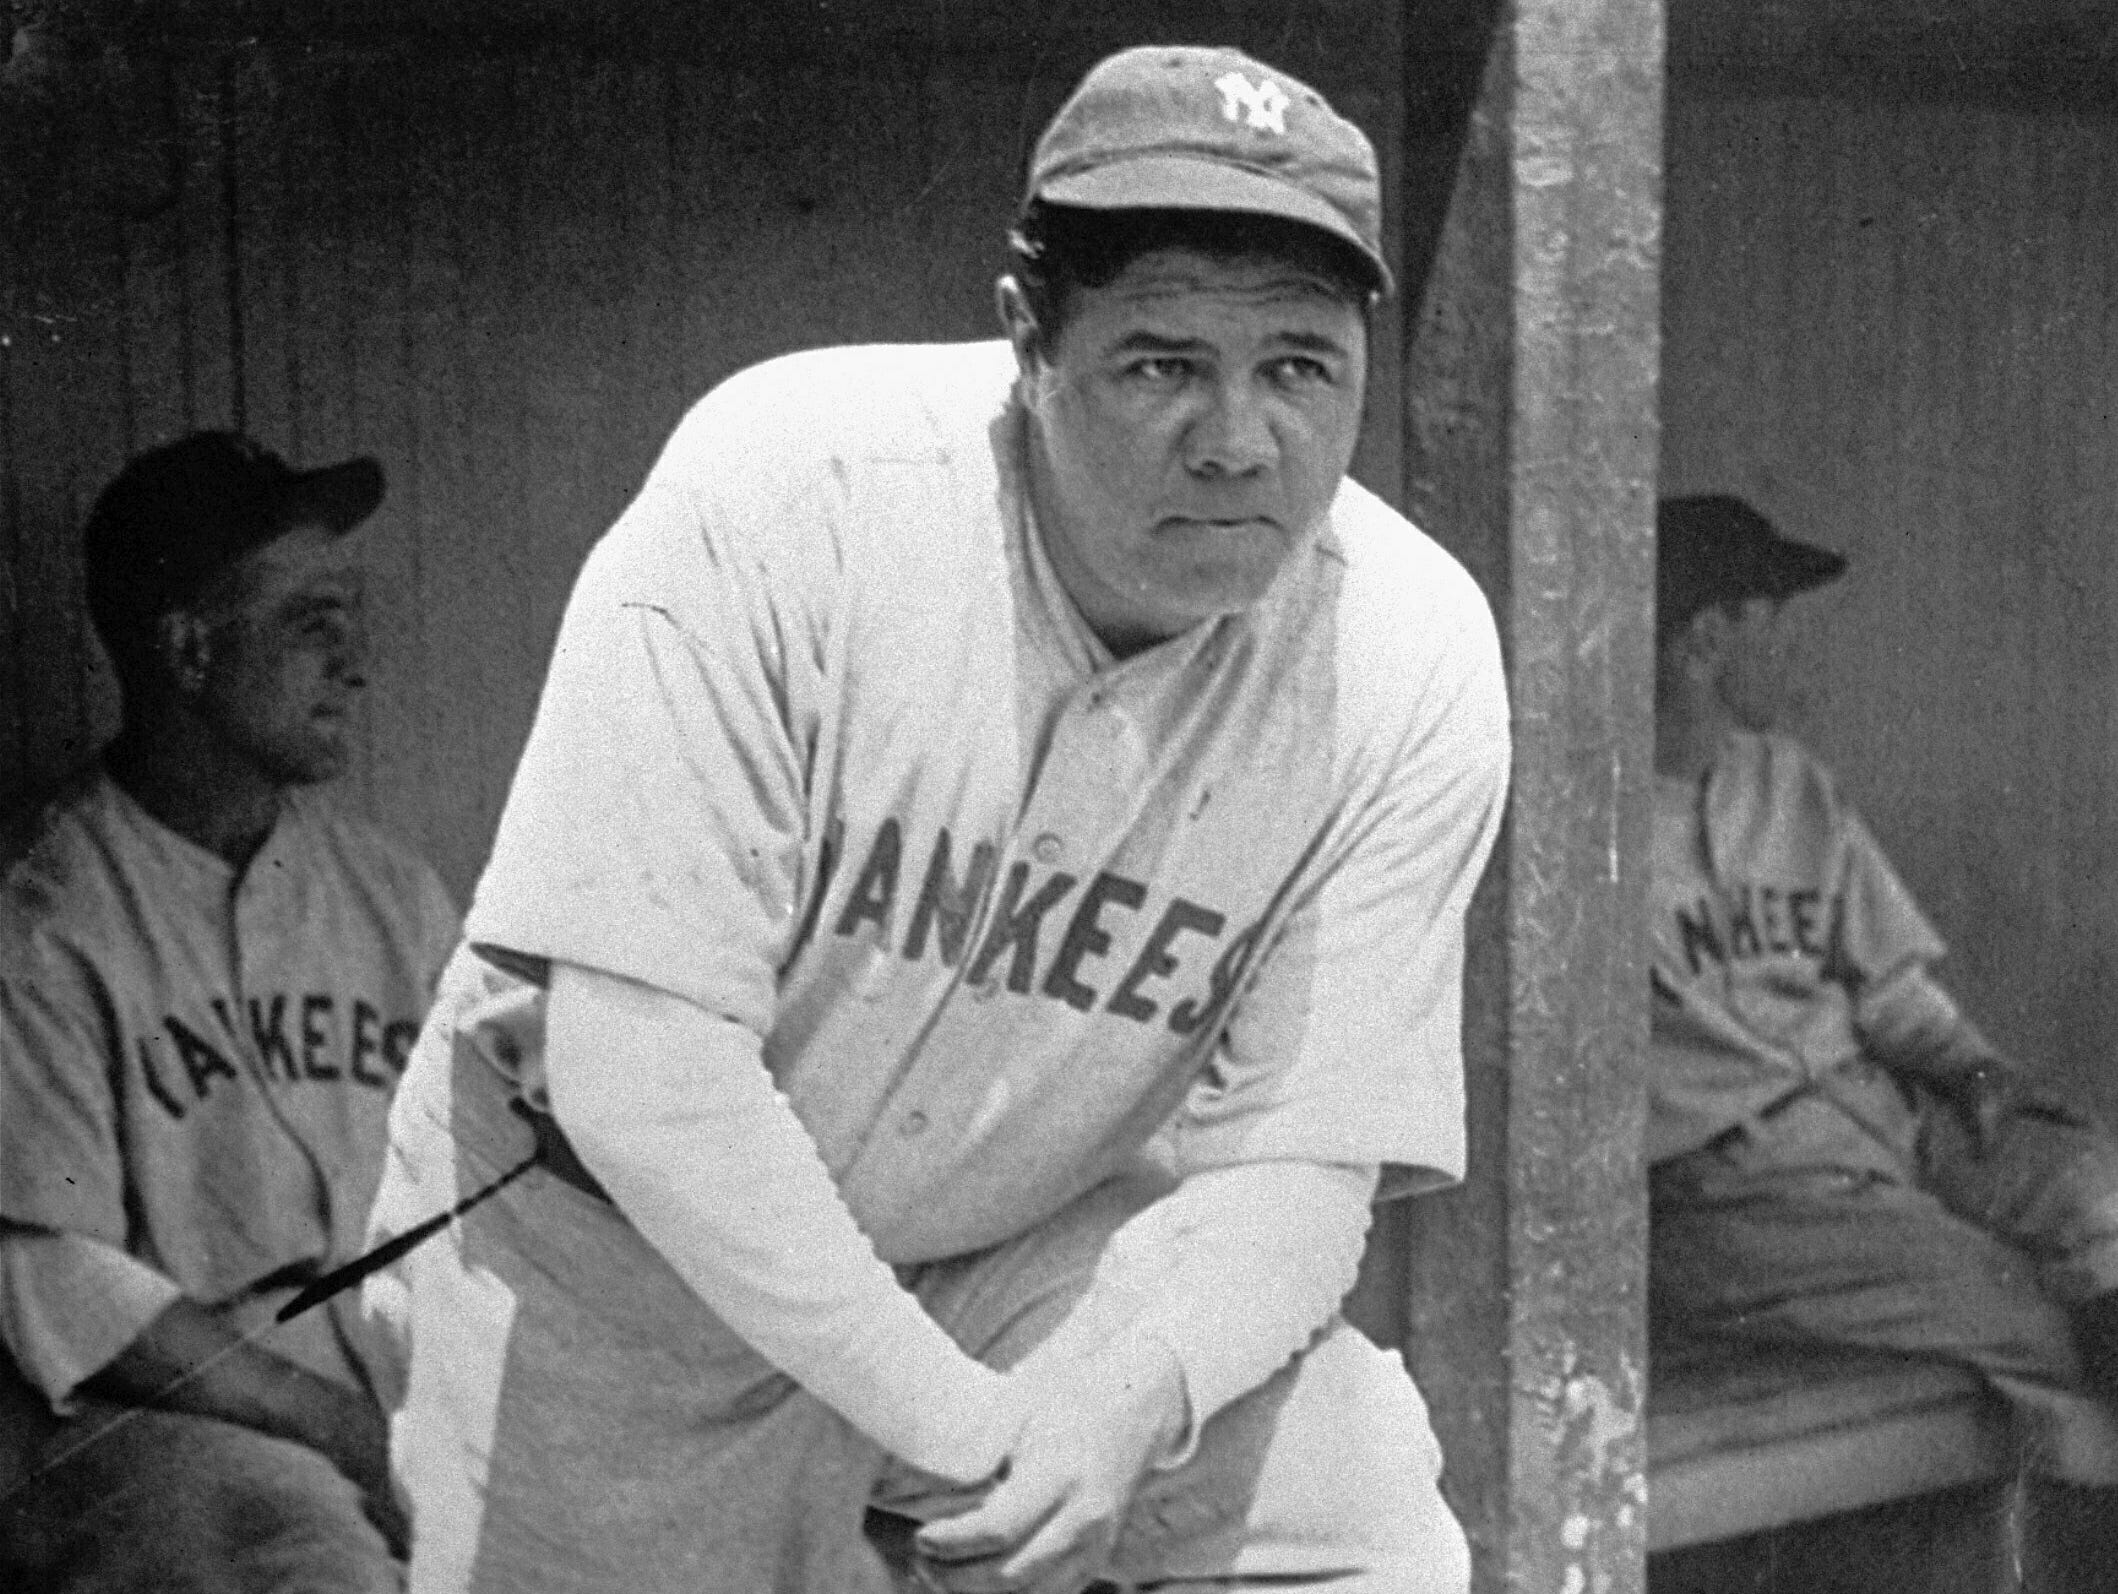 Babe Ruth's alleged practice of wearing a cabbage leaf under his cap for cooling remains unverified